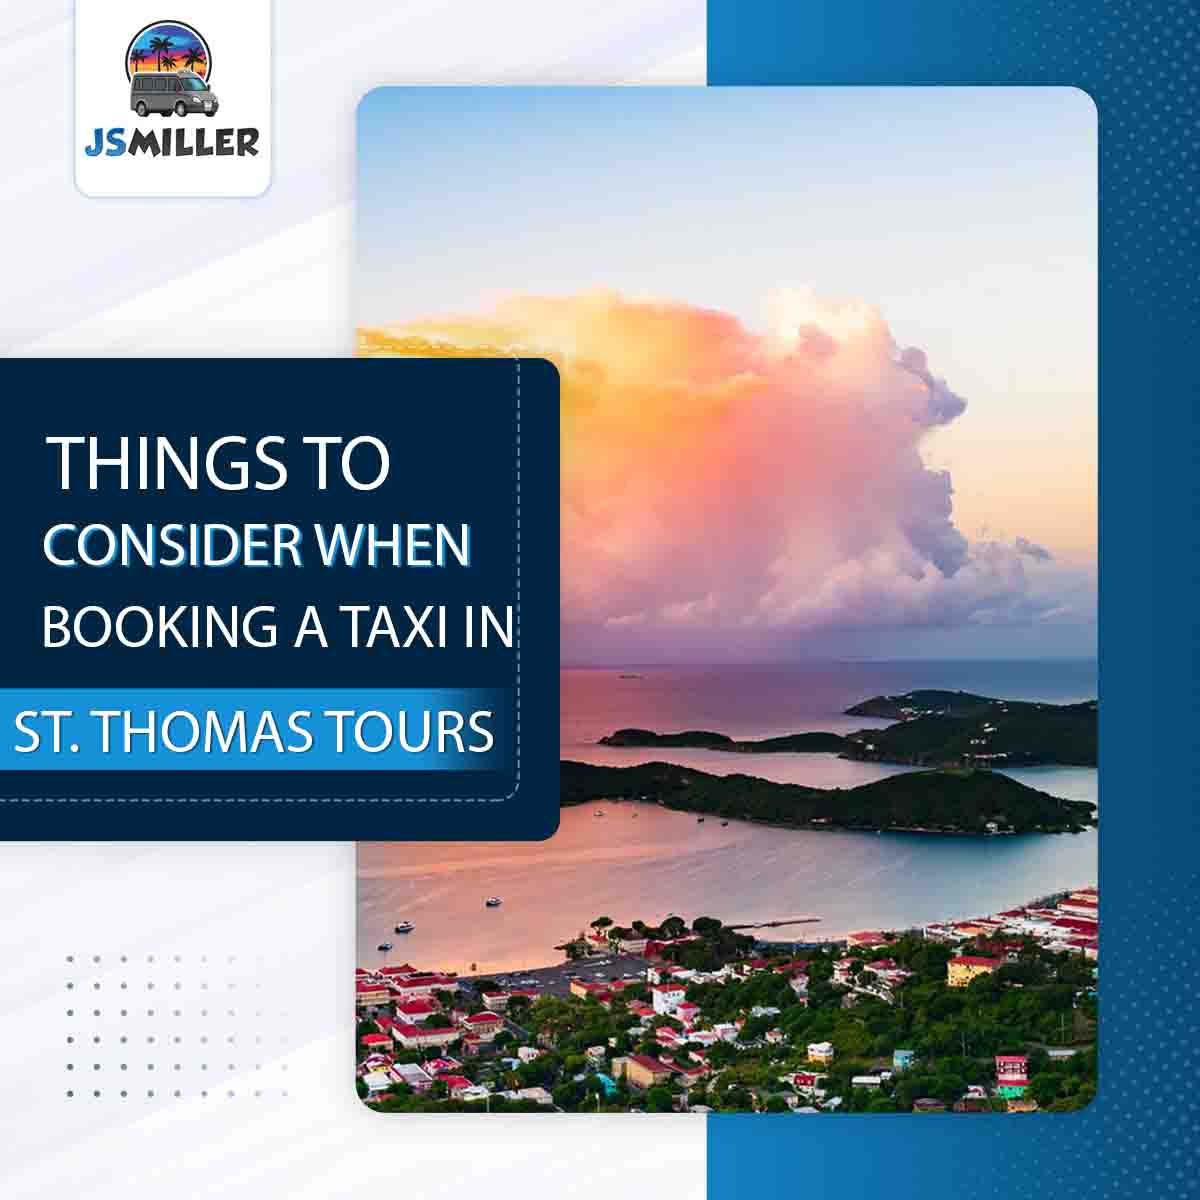 THINGS TO CONSIDER WHEN BOOKING A TAXI IN ST. THOMAS TOURS